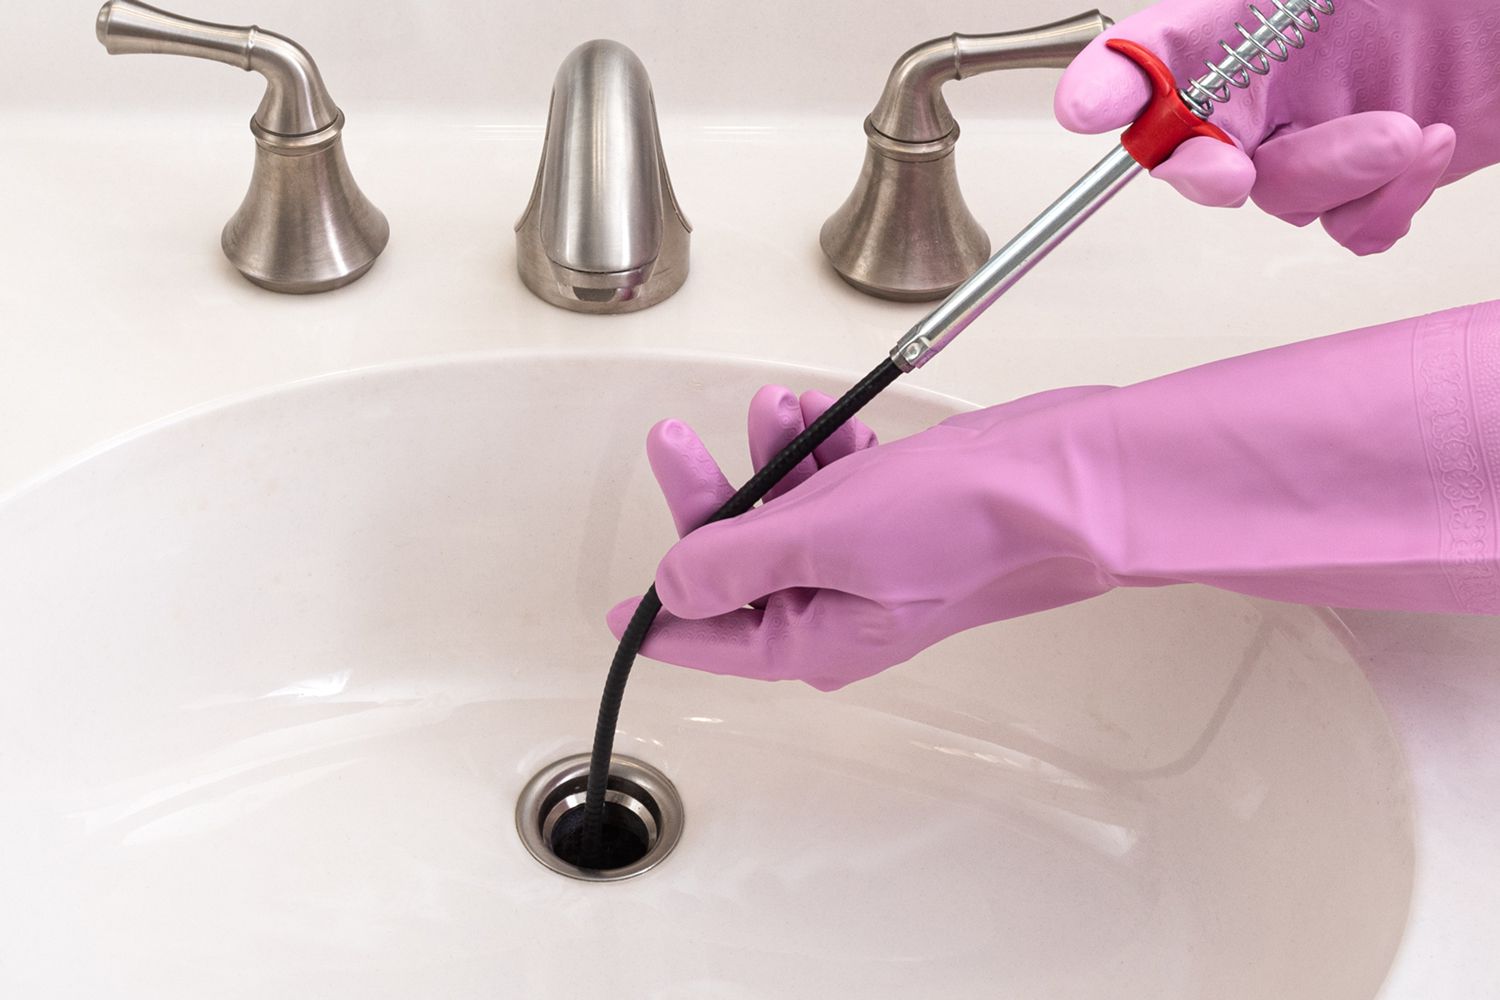 how to clean a sink drain